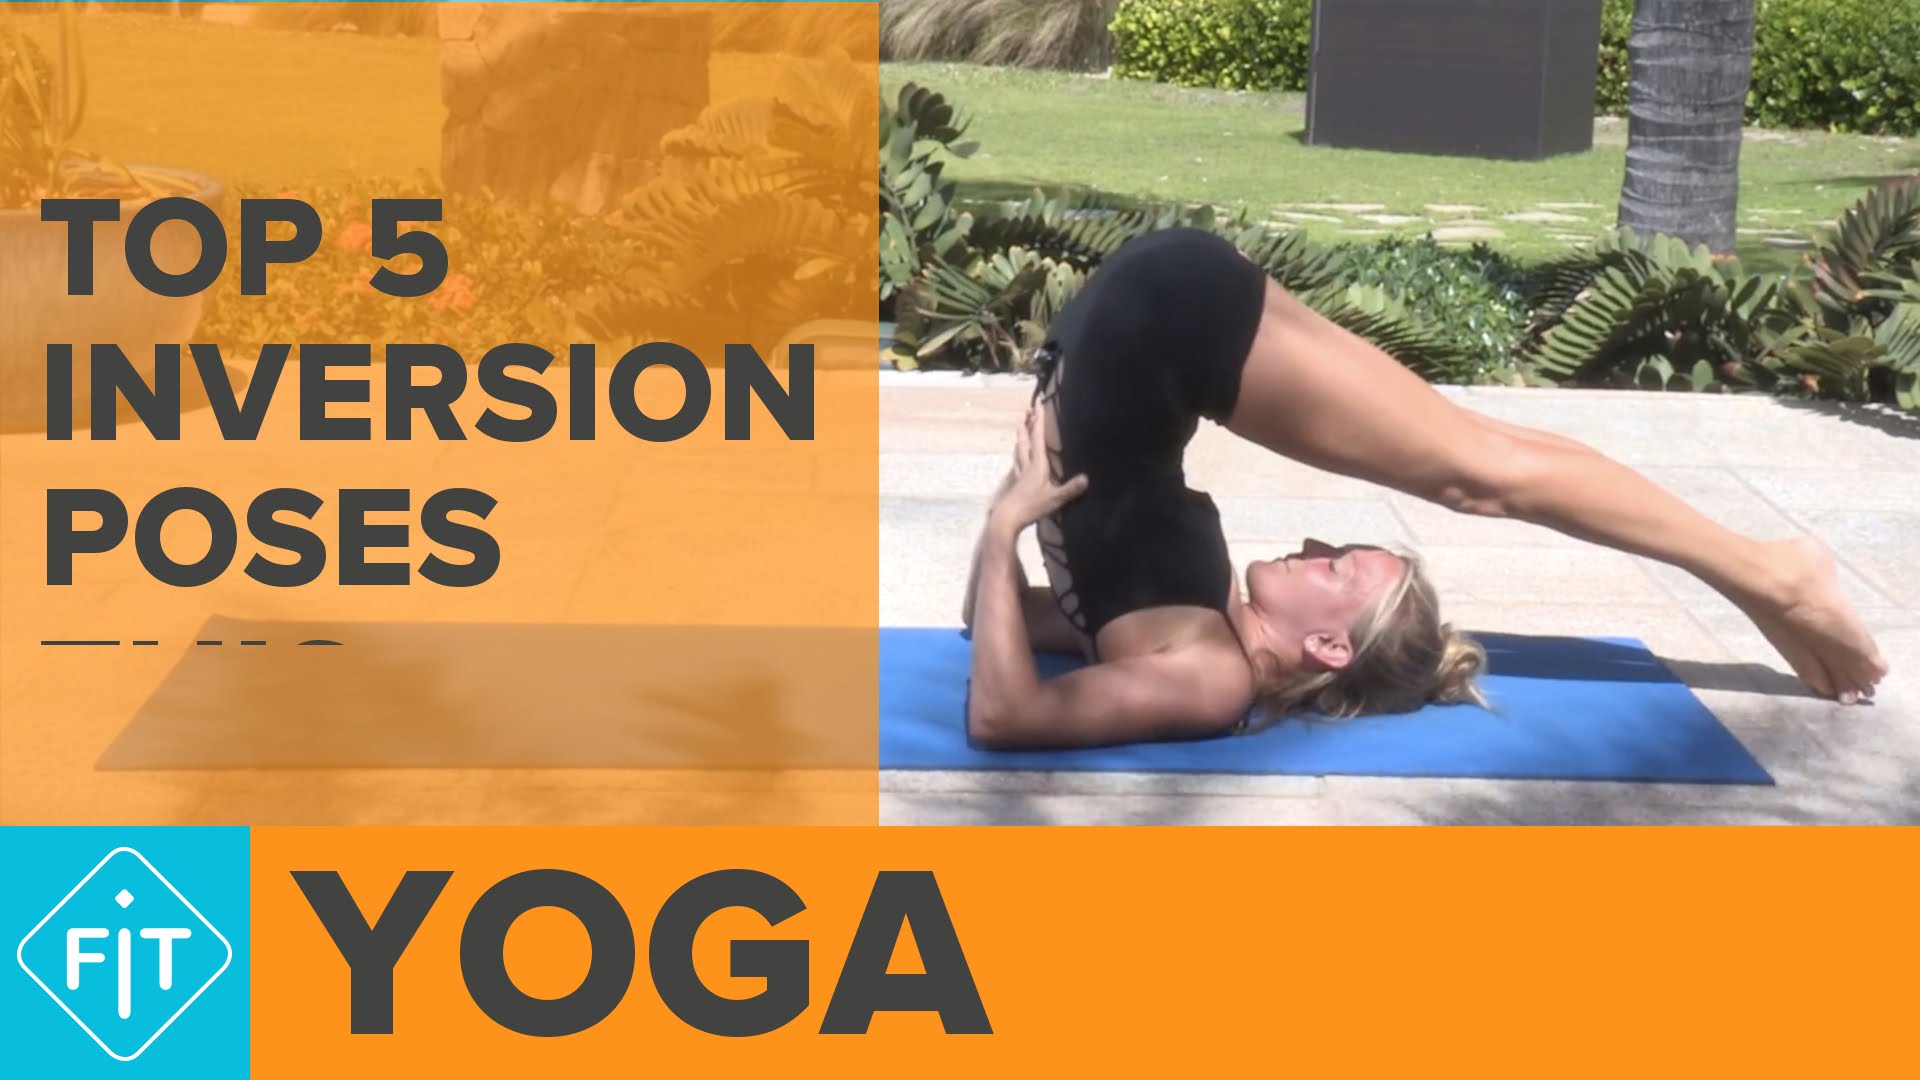 Are Yoga Inversions Good For You